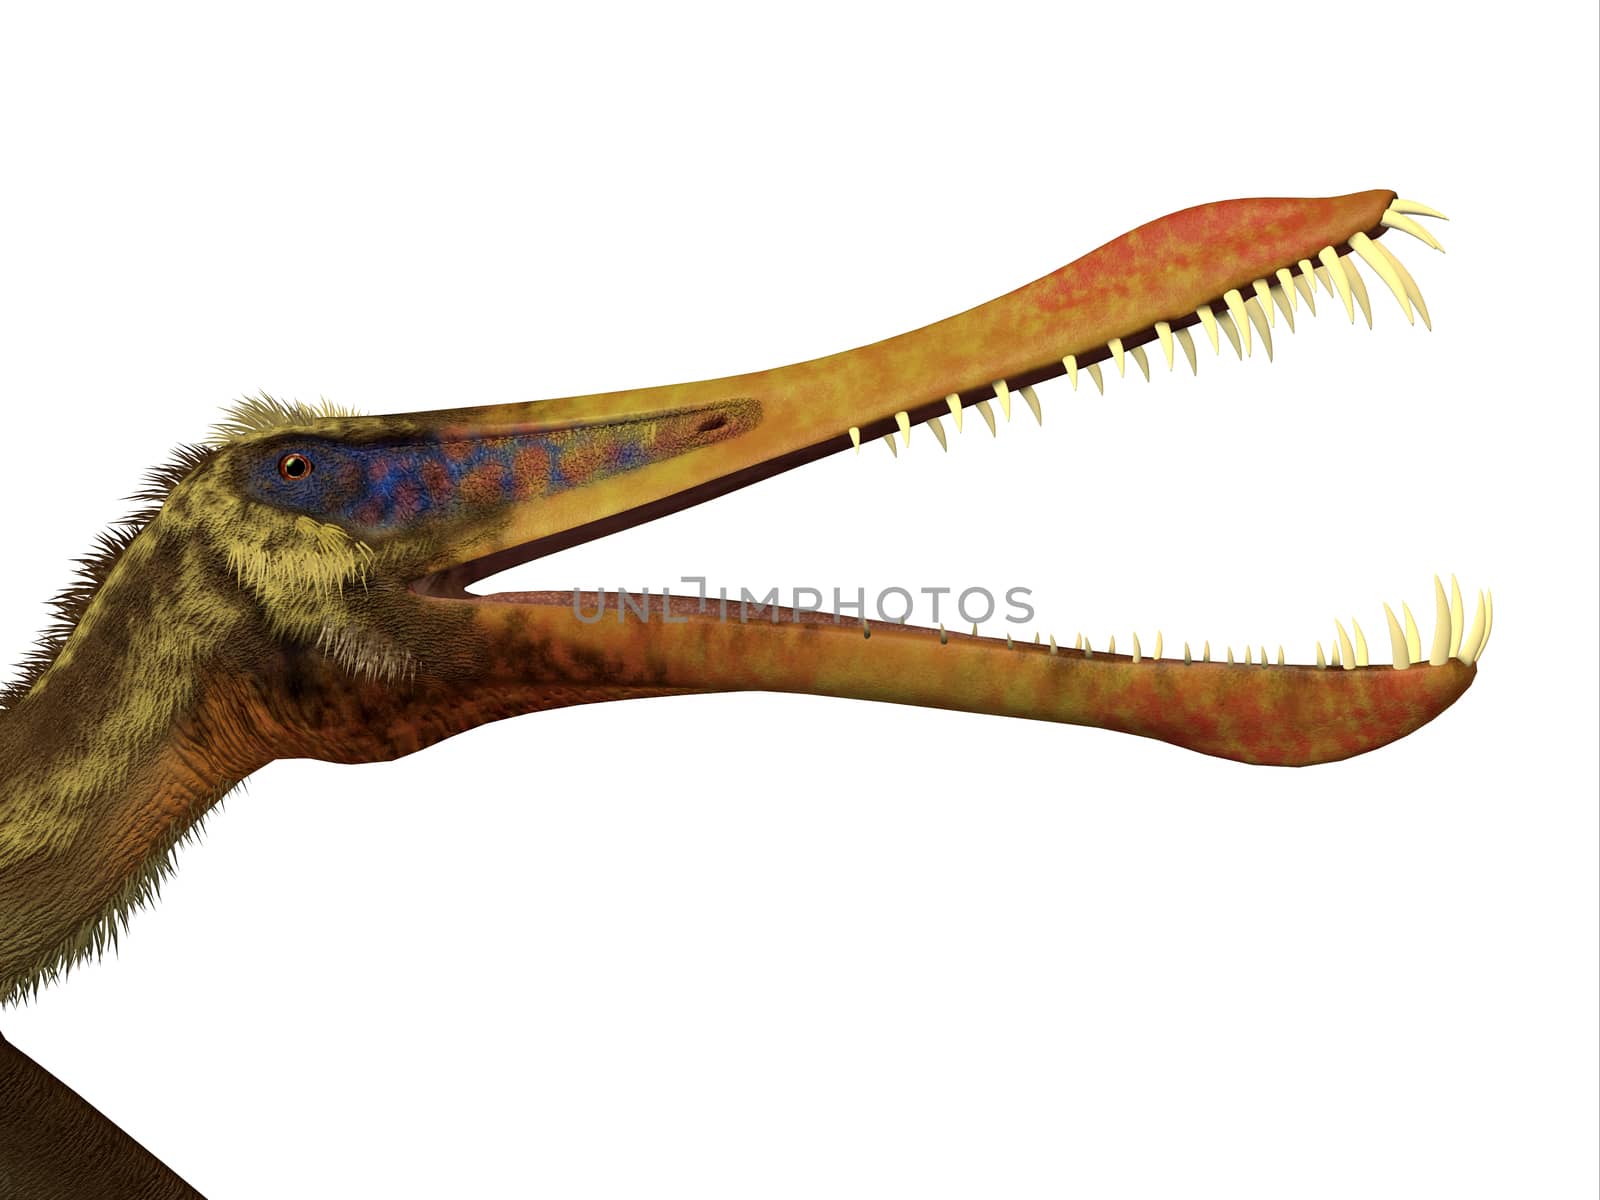 Anhanguera was a flying fish-eating pterosaur that lived in Brazil in the Cretaceous Period.